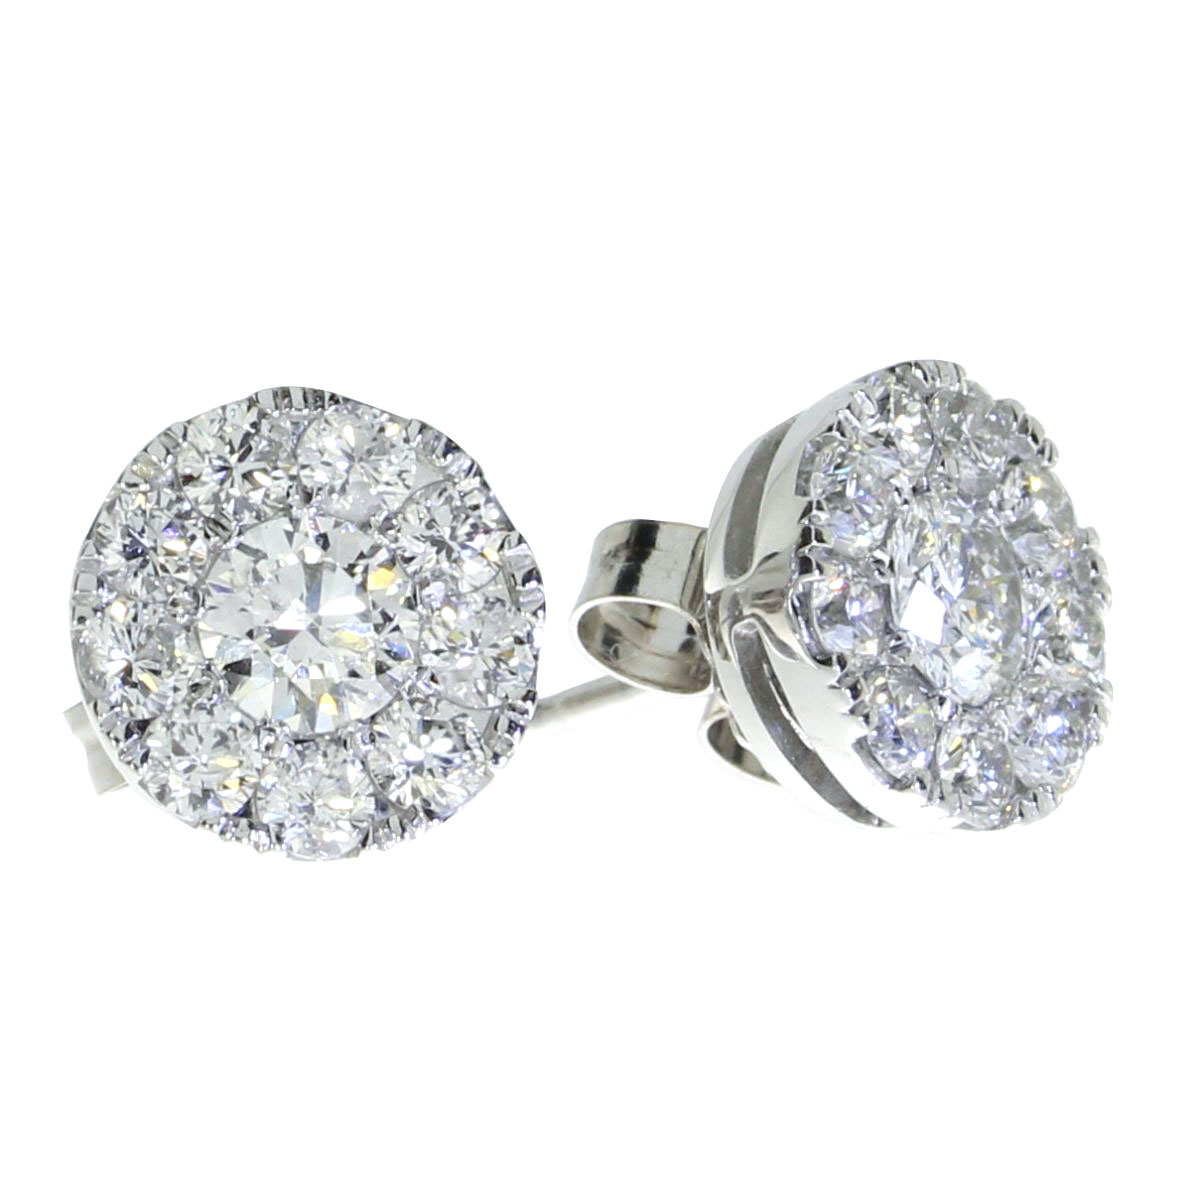 Gorgeous 14k white gold earrings with a full carat cluster of shimmering high quality diamonds.